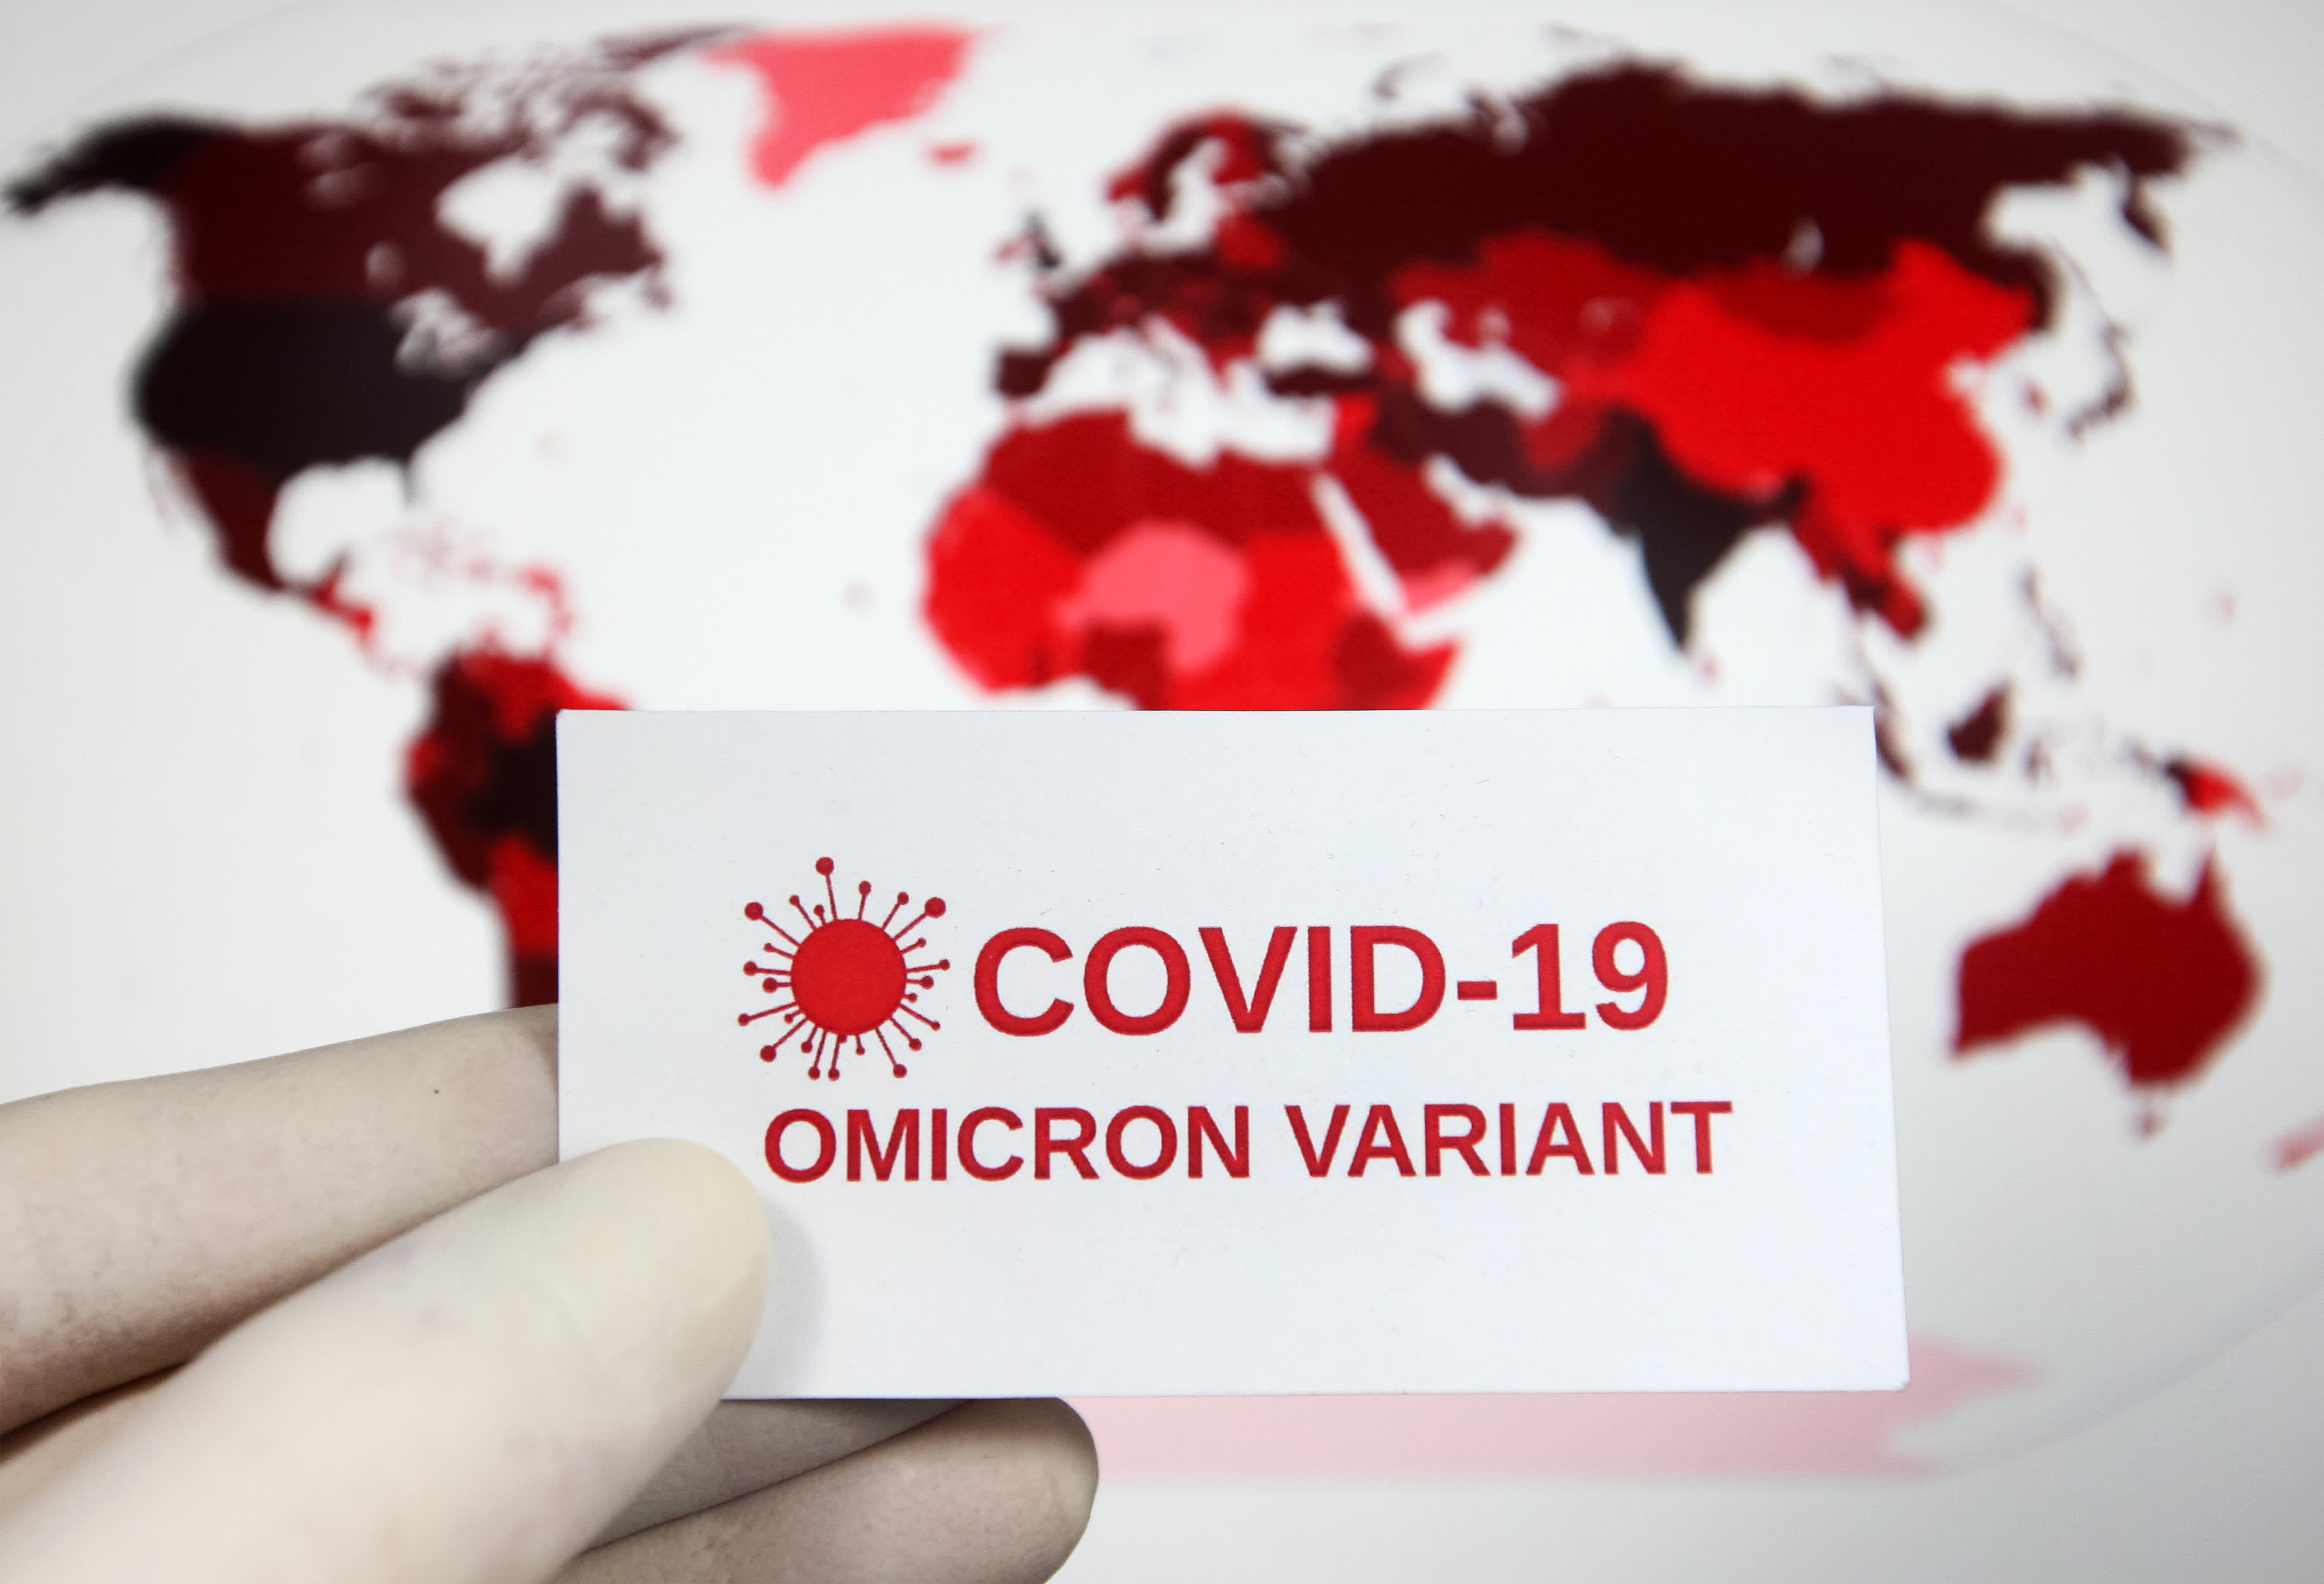 WHO says omicron Covid variant has spread to 38 countries